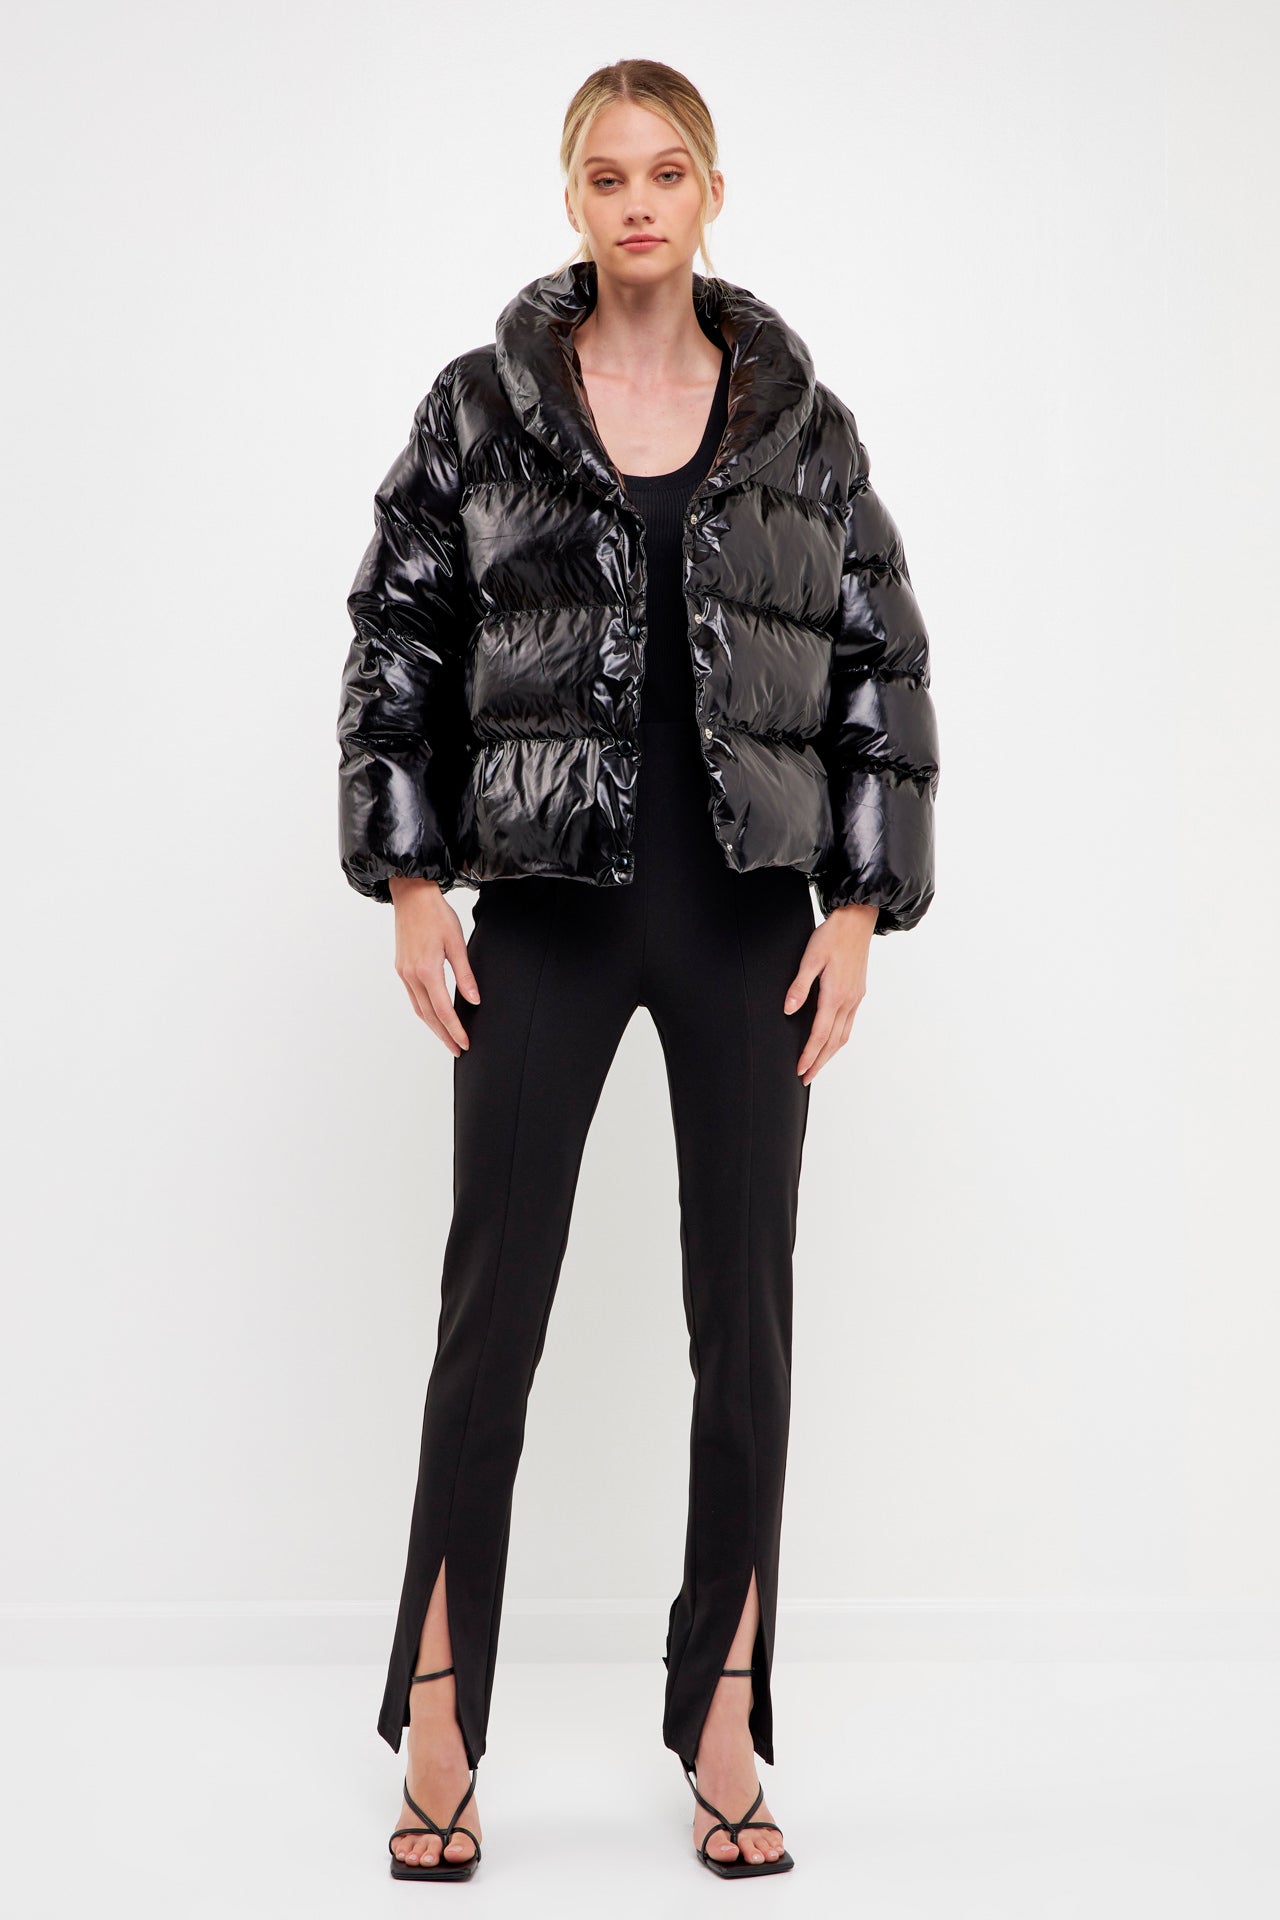 Endless Rose - Belted Puffer Jacket -  in Women's Clothing available at endlessrose.com